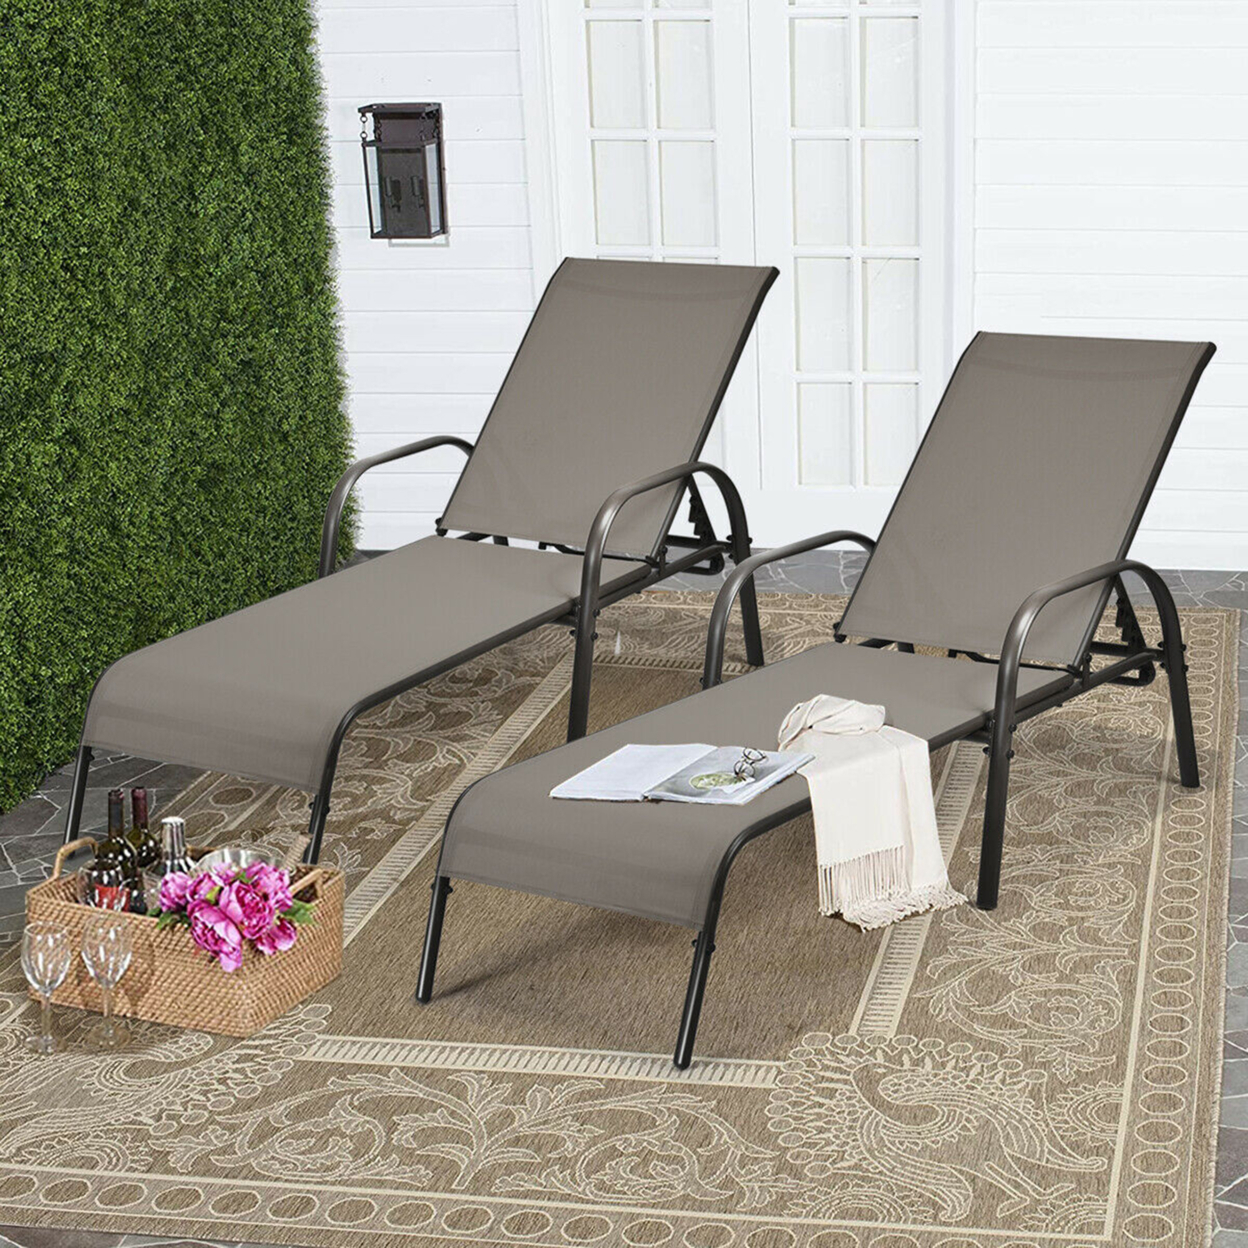 2PCS Adjustable Chaise Lounge Chair Recliner Patio Yard Outdoor W/ Armrest Brown